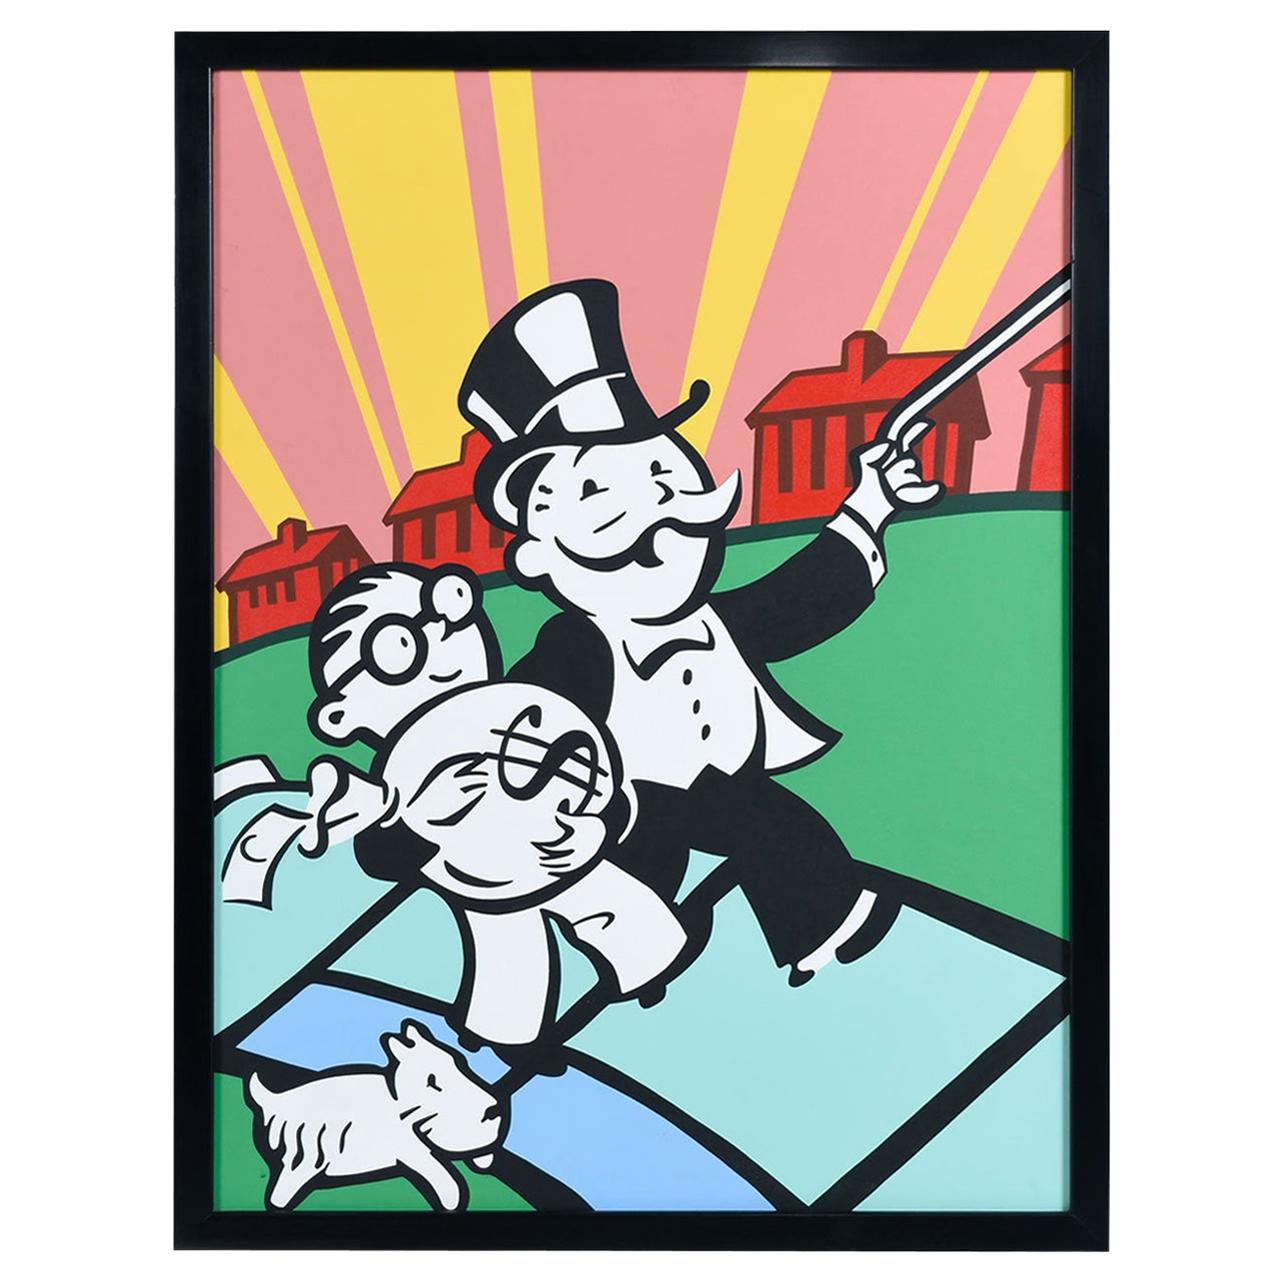 Monopoly Game Themed Framed Acrylic Pop-Art Painting by Terry Kennedy